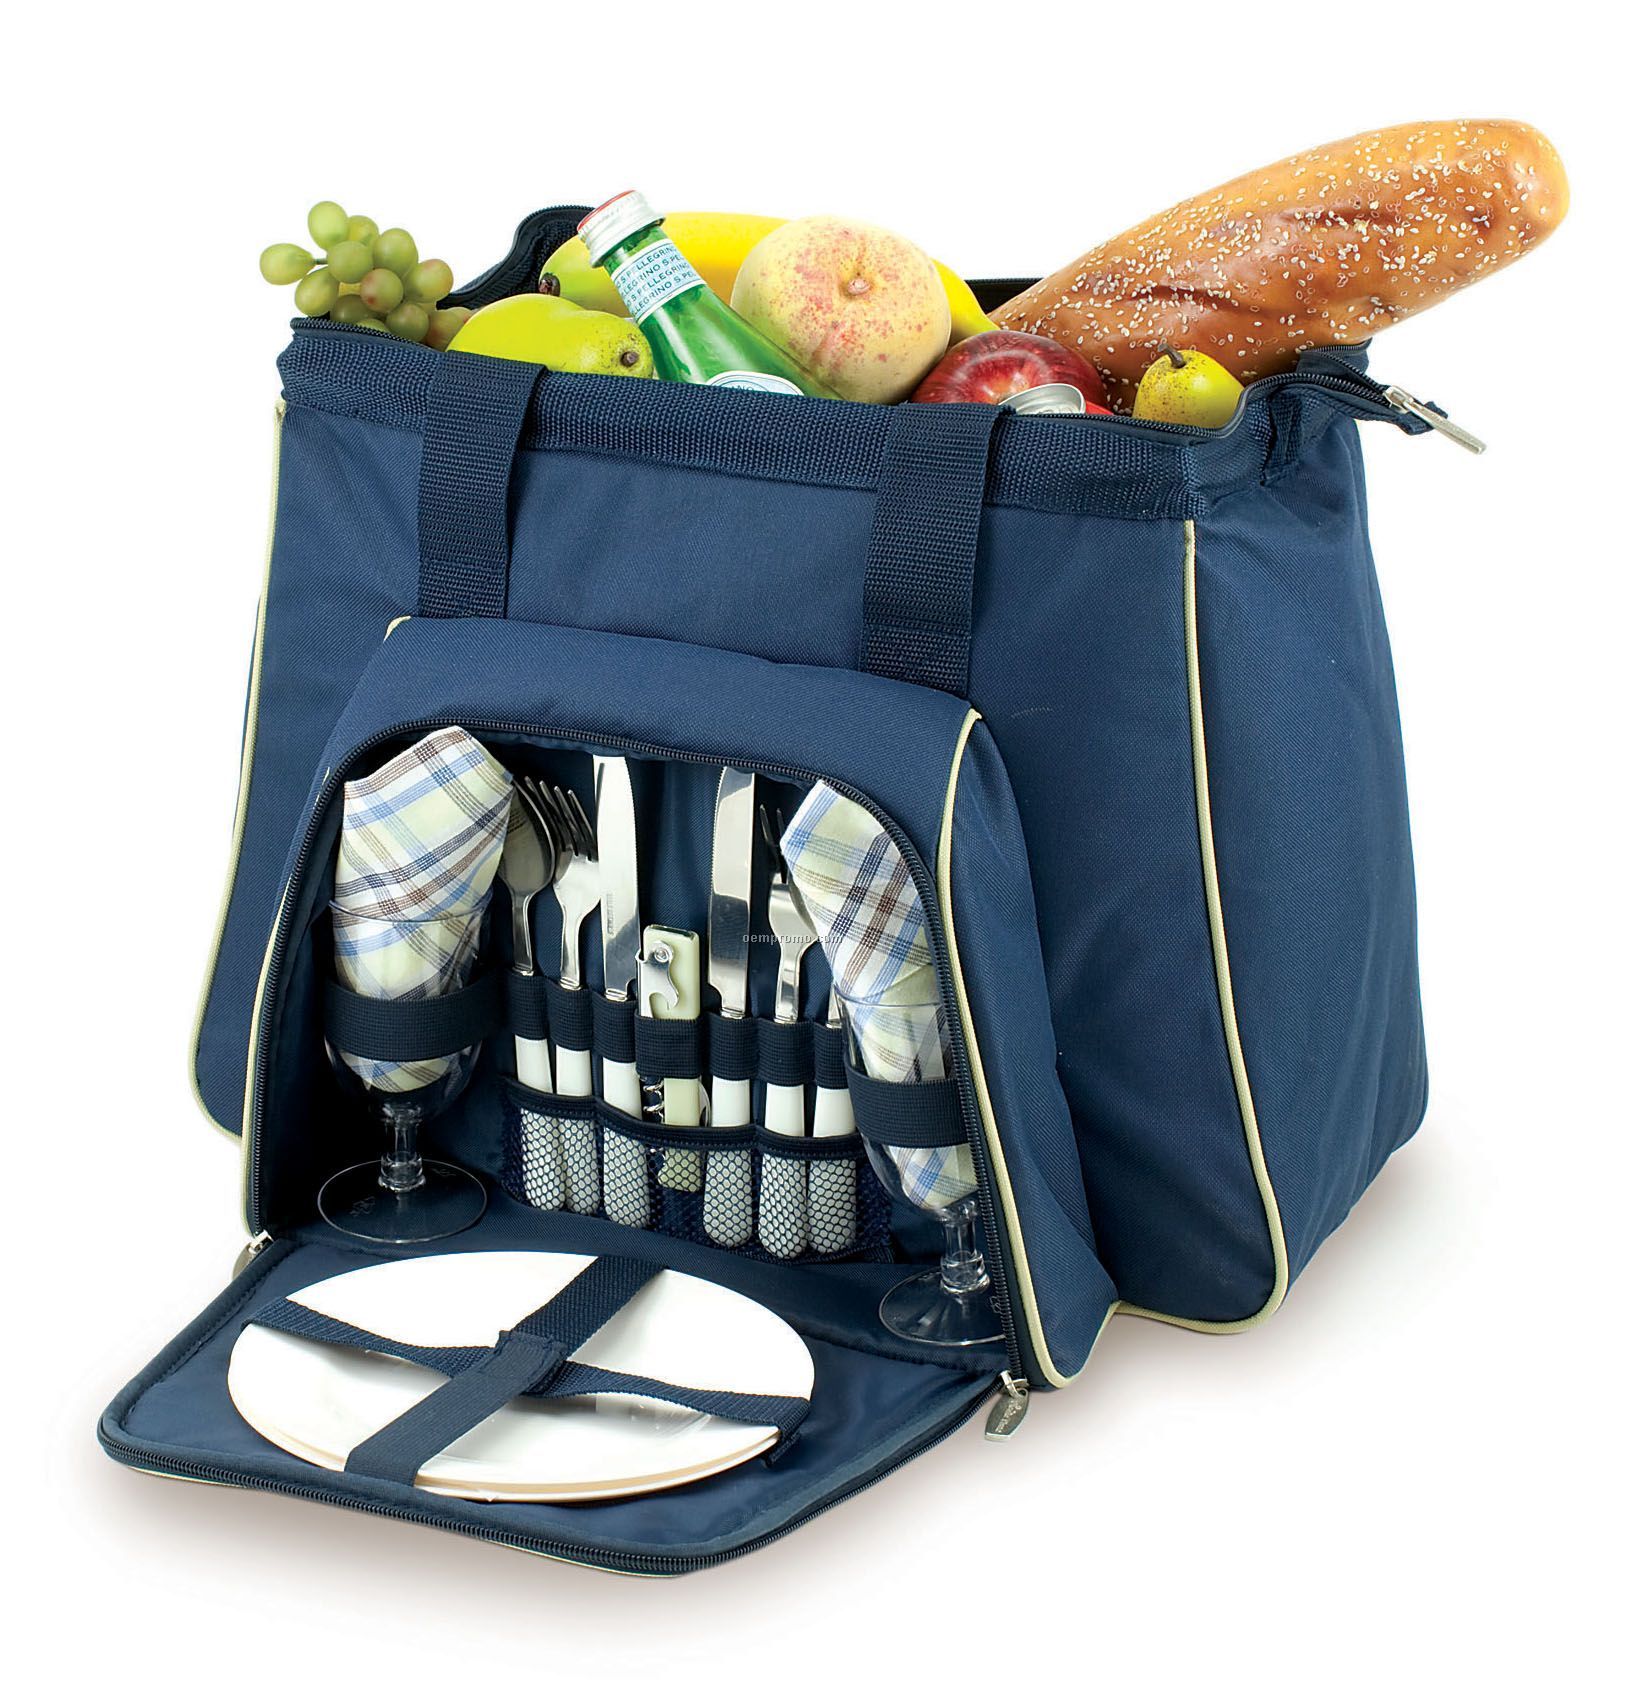 Toluca Insulated Cooler W/ Deluxe Picnic Service For 2 (24 Can Capacity)